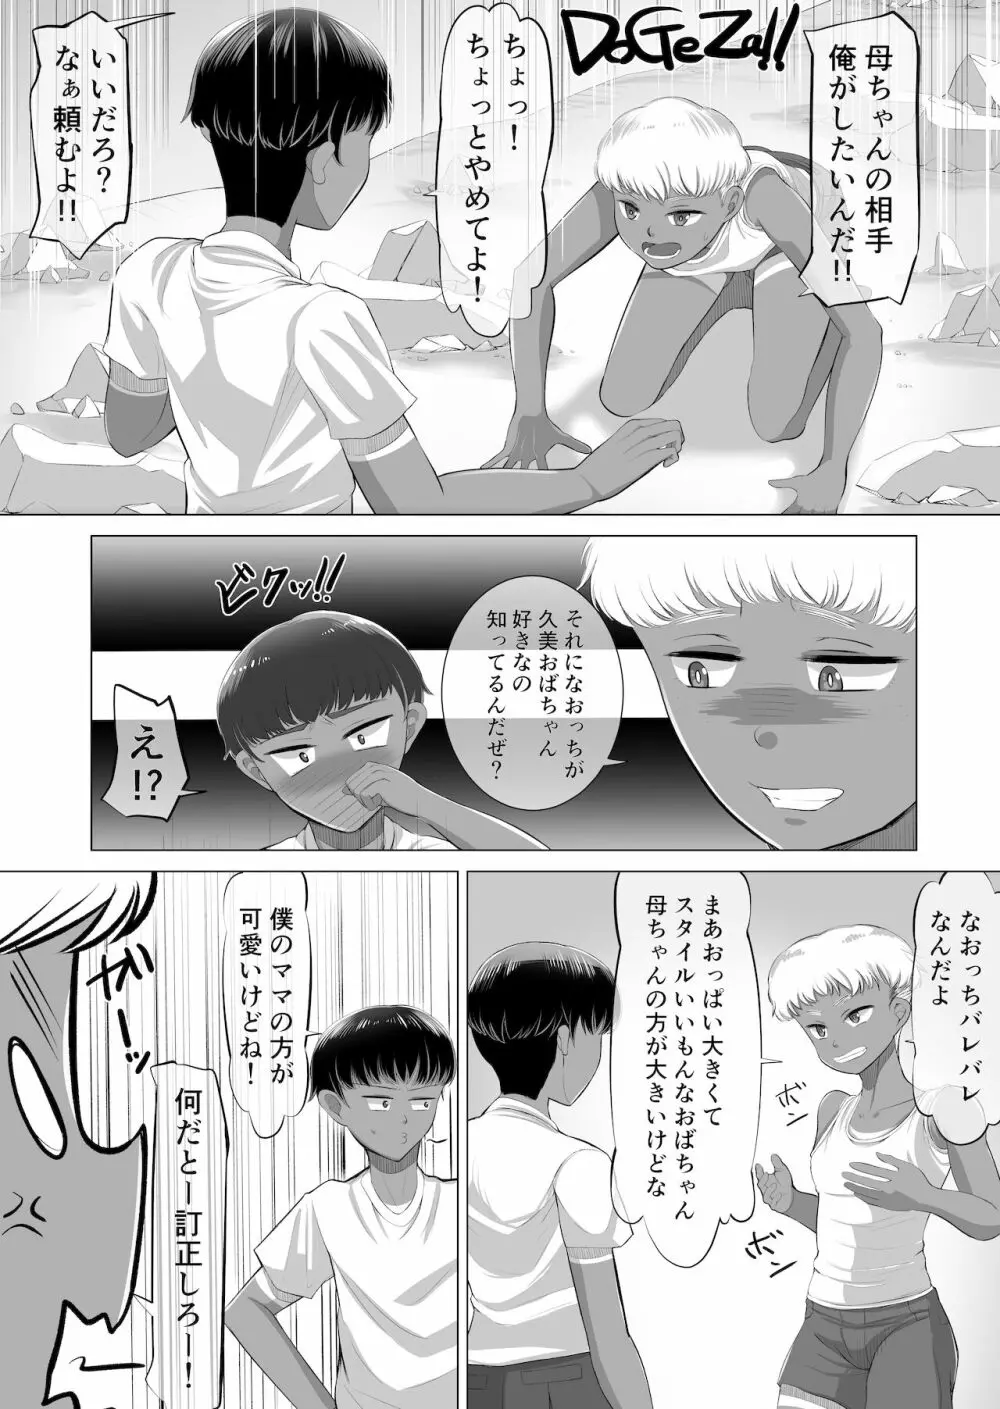 The 神孕村～やっくをやっつけろの巻～ Page.15